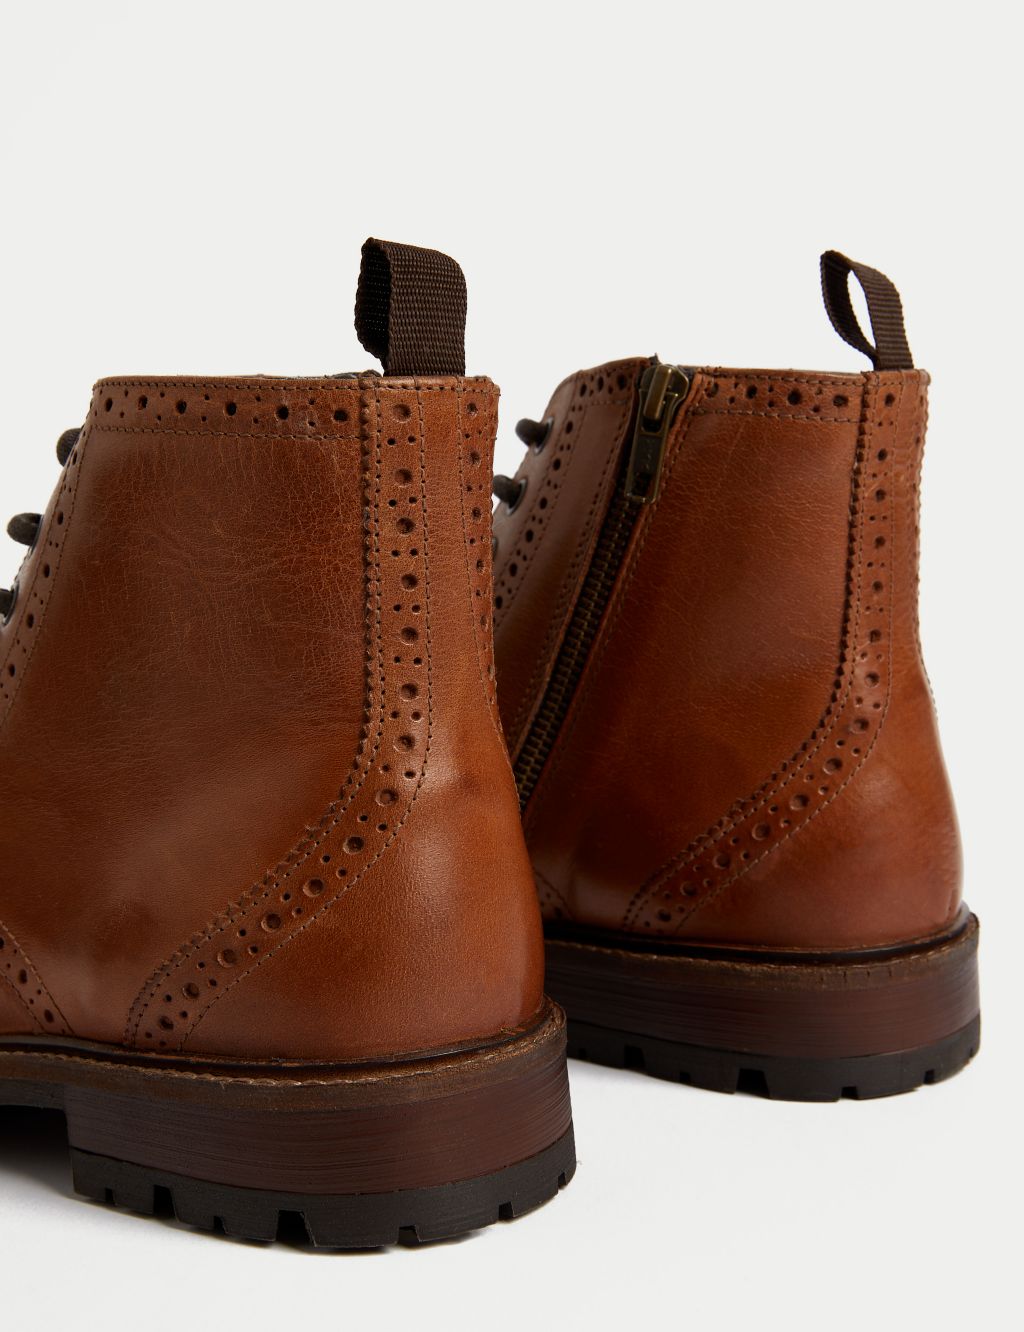 Leather Side Zip Brogue Casual Boots image 3